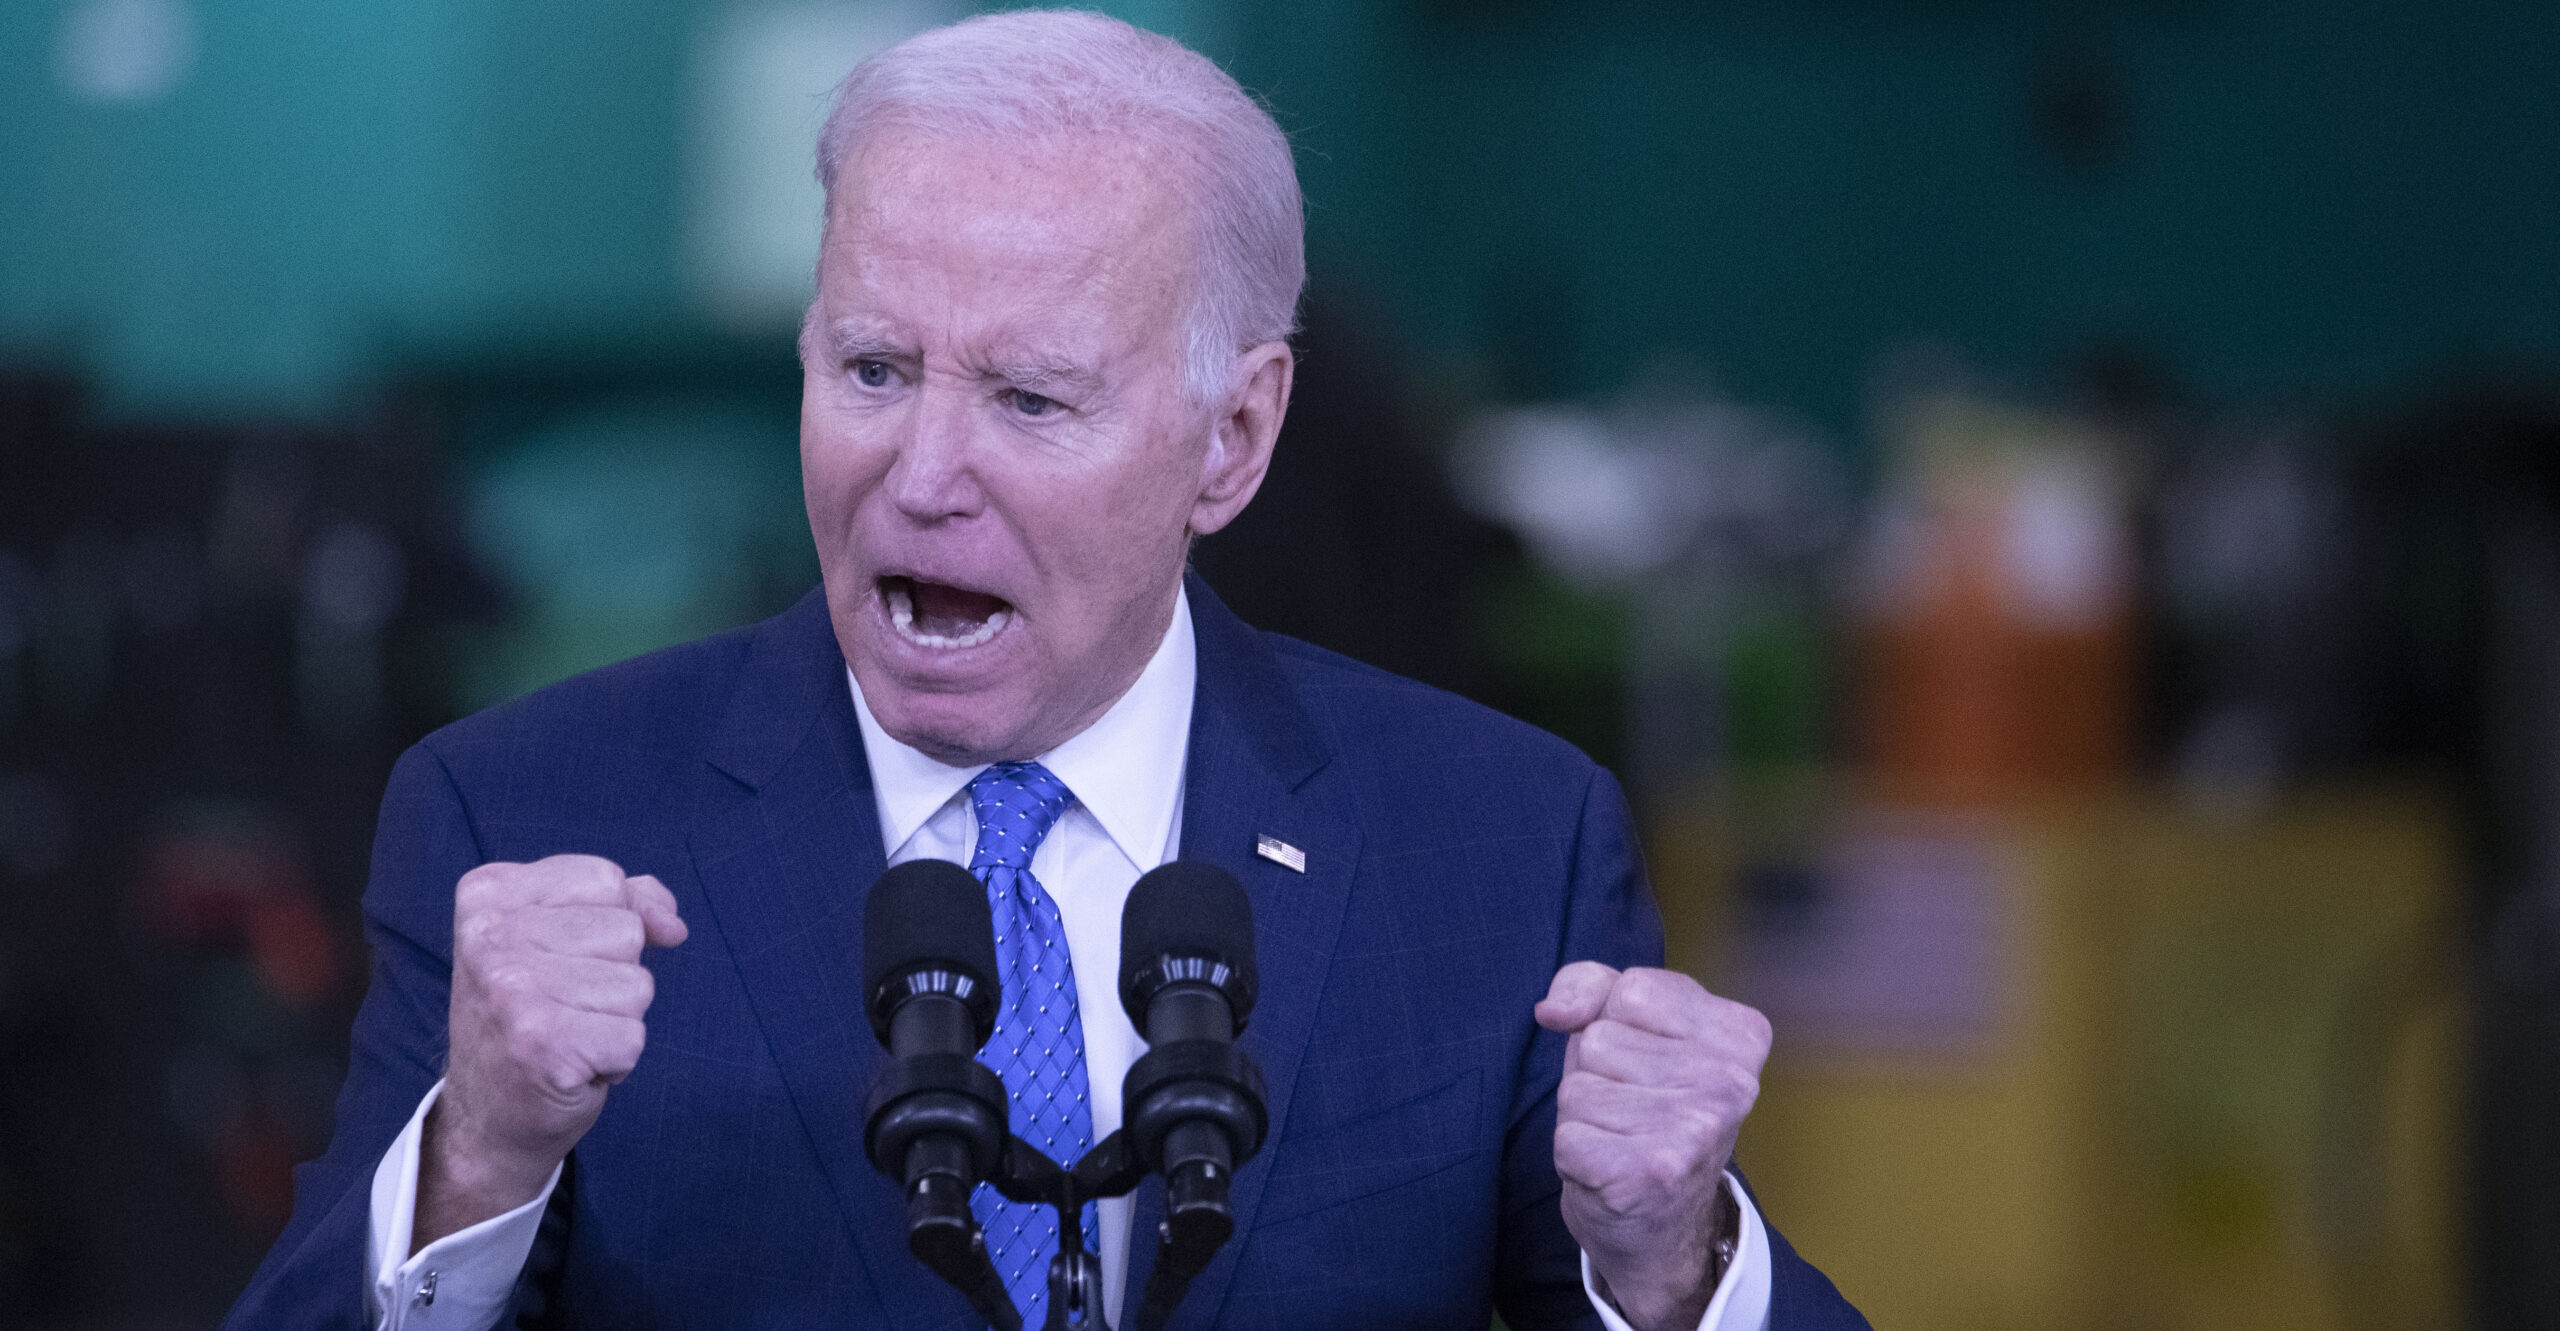 Fact-Checking 4 Biden Claims About Economy and Manufacturing